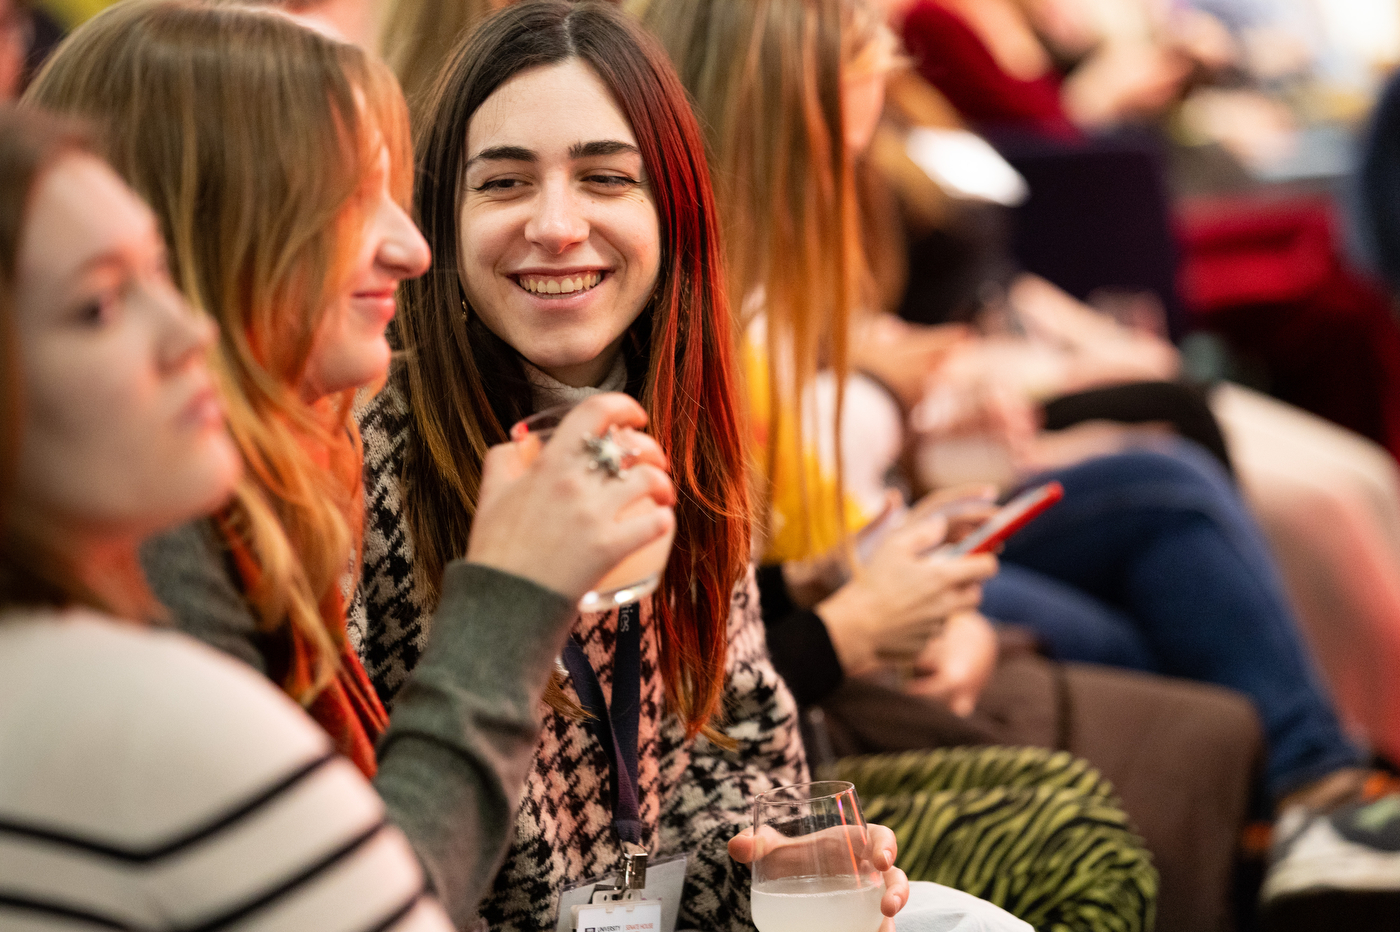 Attendees smiling at each other at a Women Who Empower event in London.